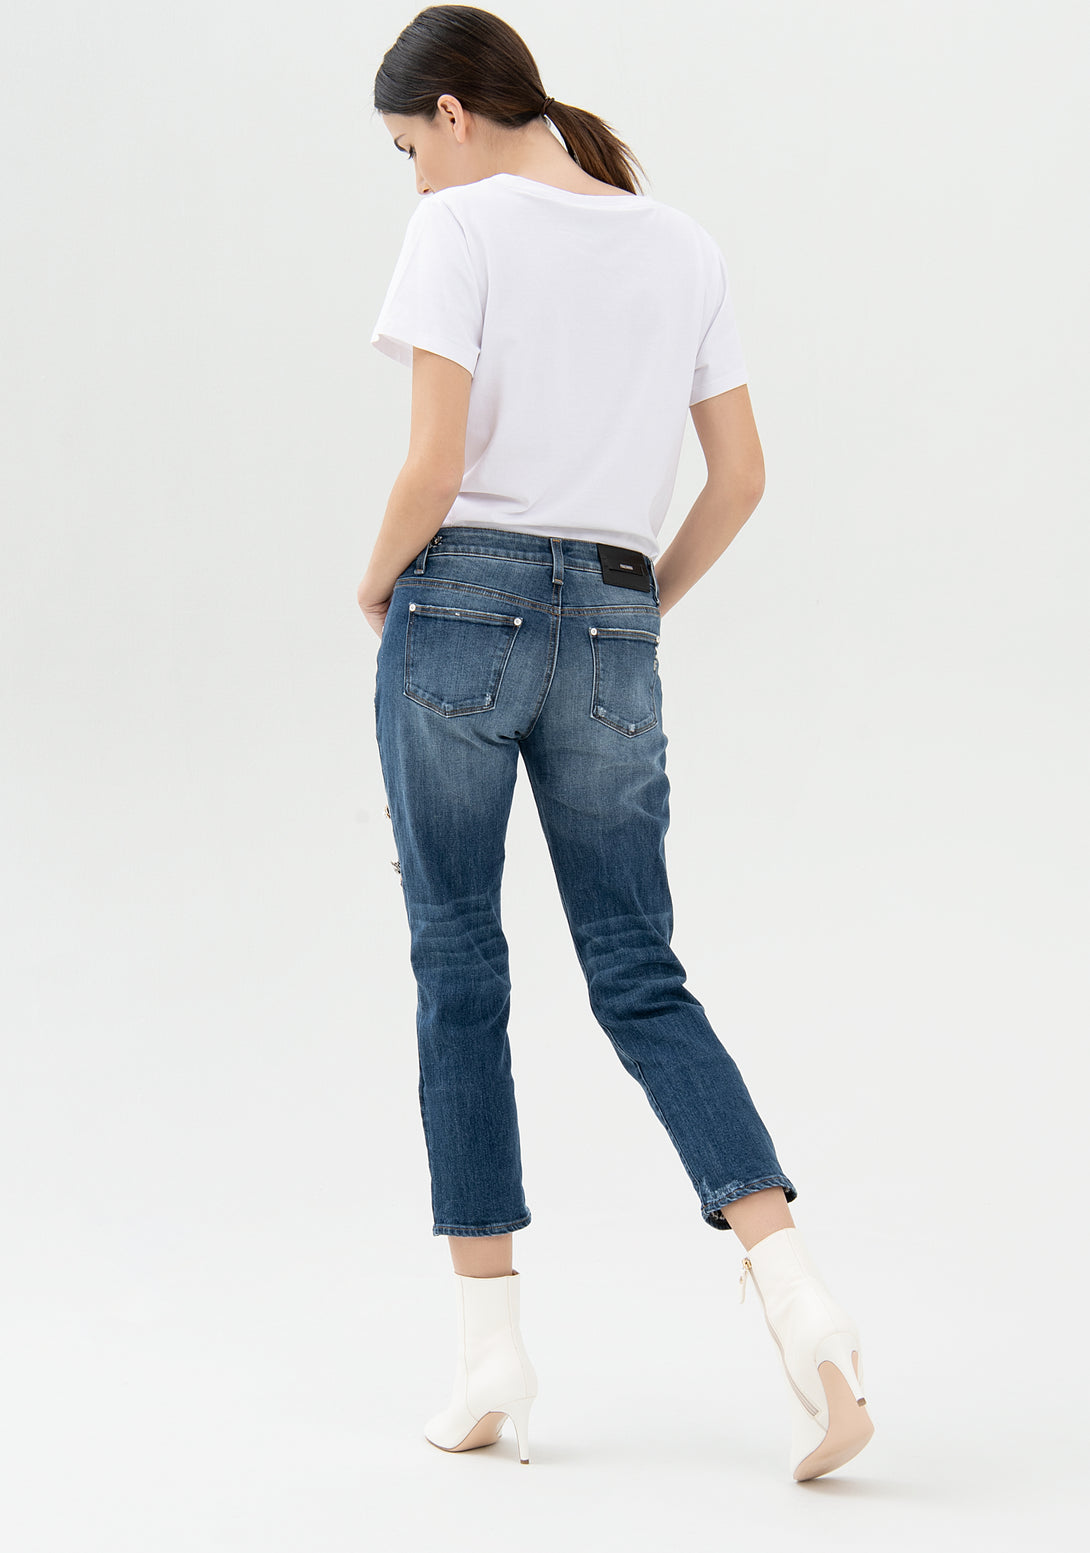 Jeans loose fit cropped made in denim with dark wash